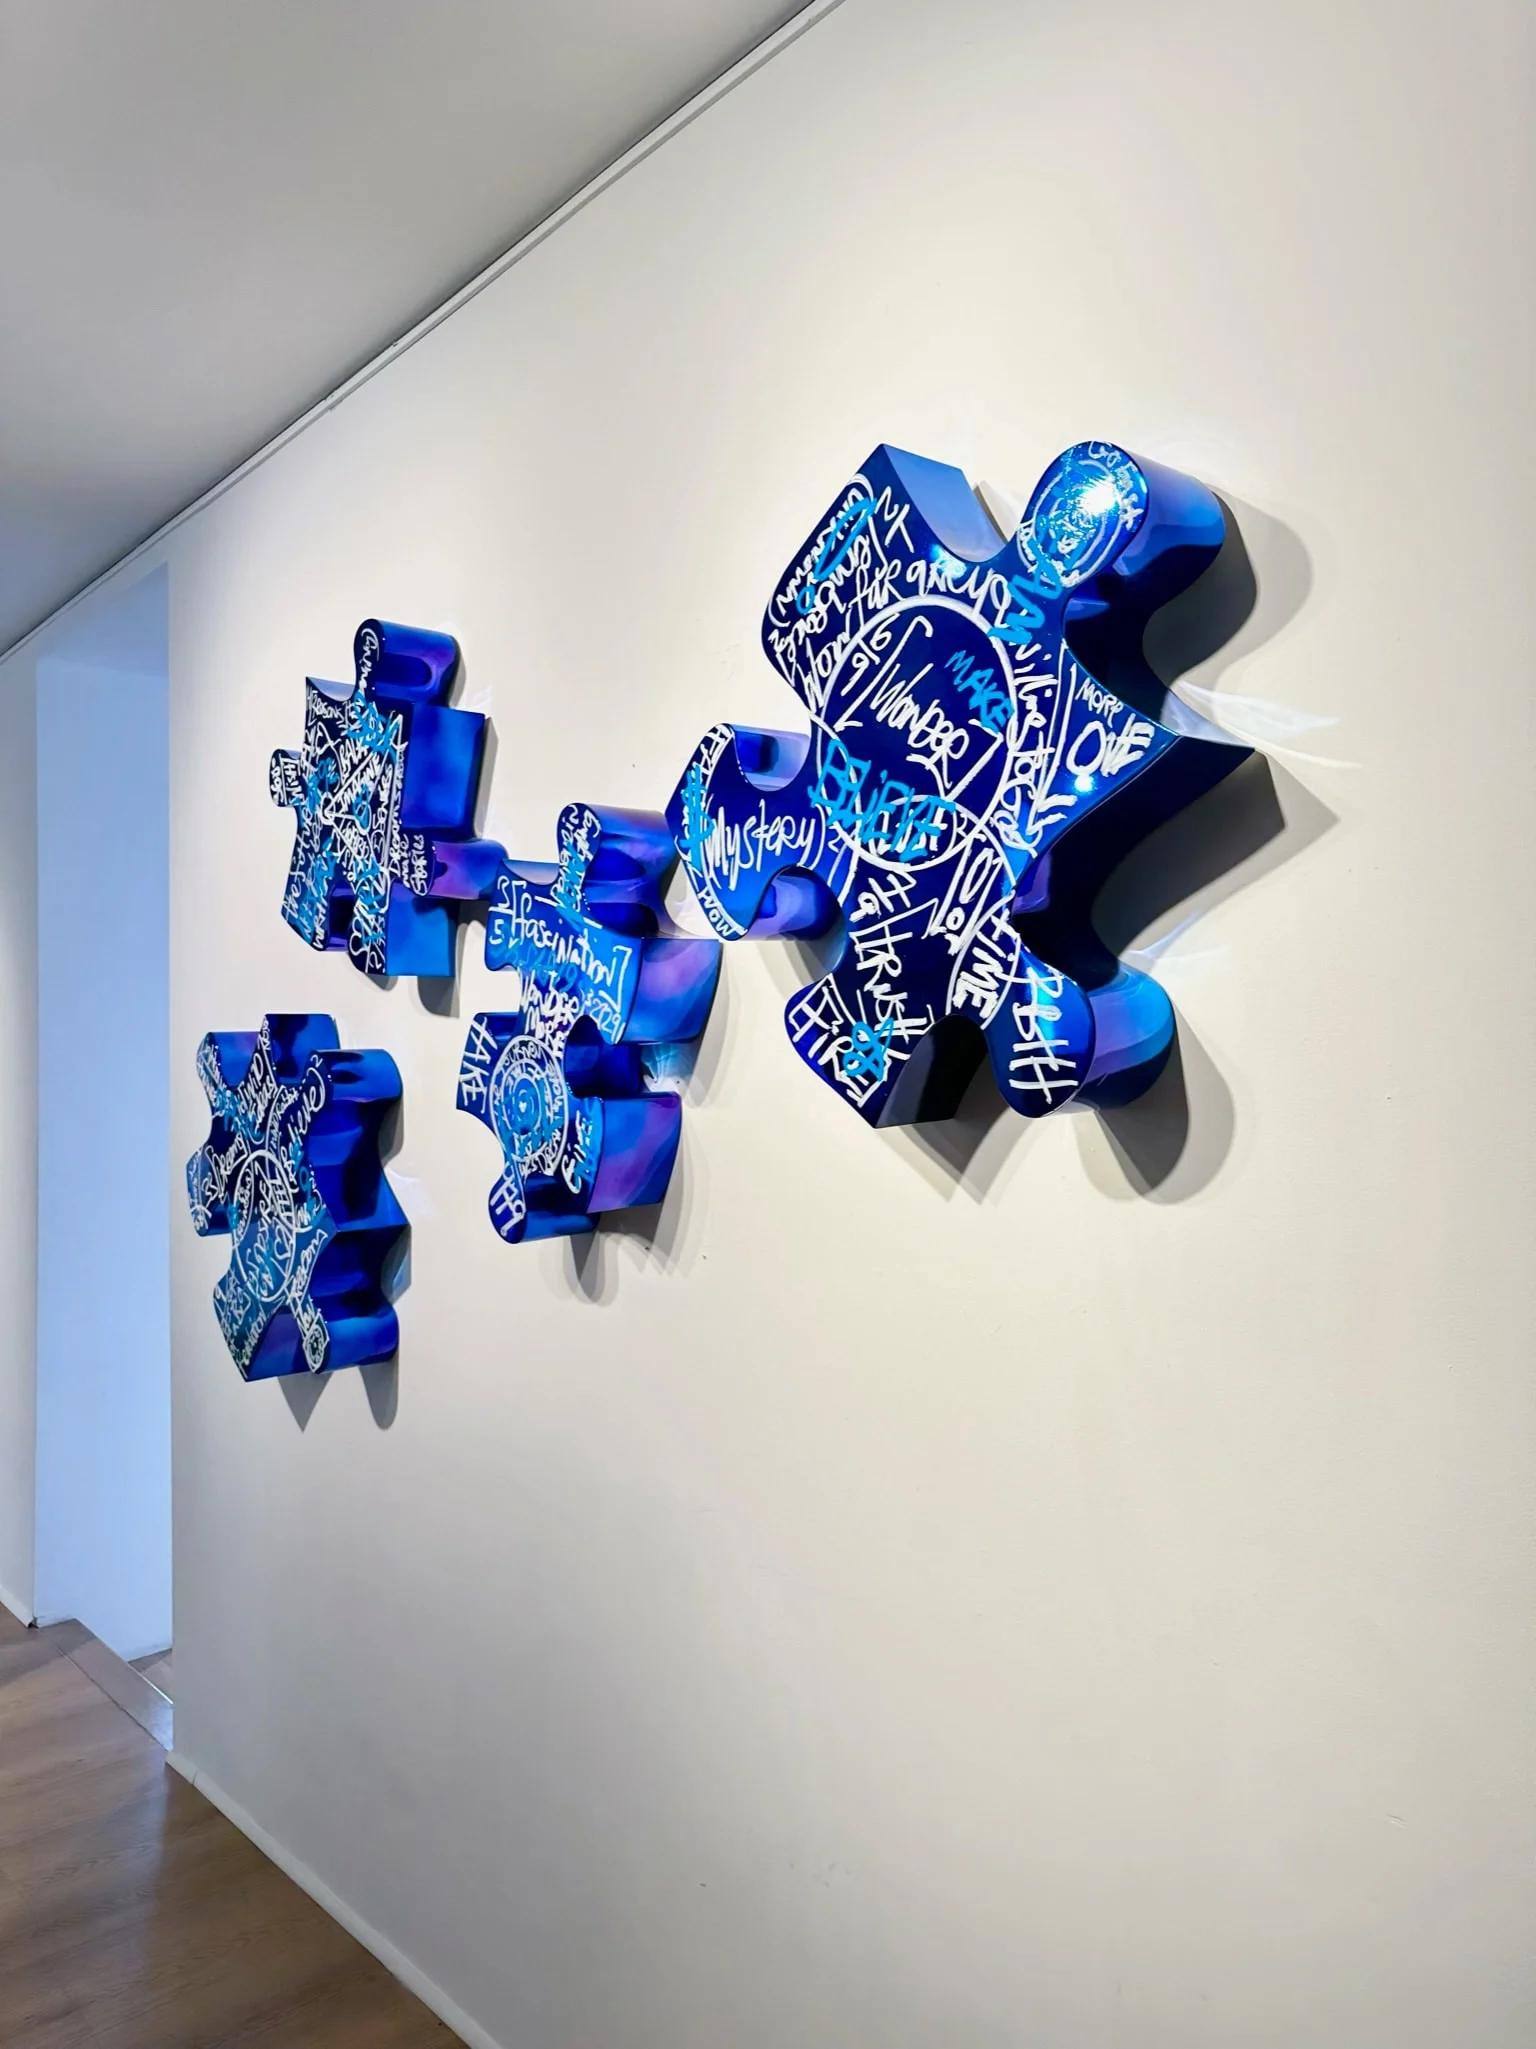 Brendan Murphy
Life is a Jigsaw (Dark Blue), 2021
Signed by artist
Wall sculpture with silver based metallic chrome paint with hand painted formulas
4 piece set
I: 31 x 27 x 5.5 inches
II: 25 x 22 x 5.5 inches
III: 25 x 14 x 5.5 inches
IIII: 27 x